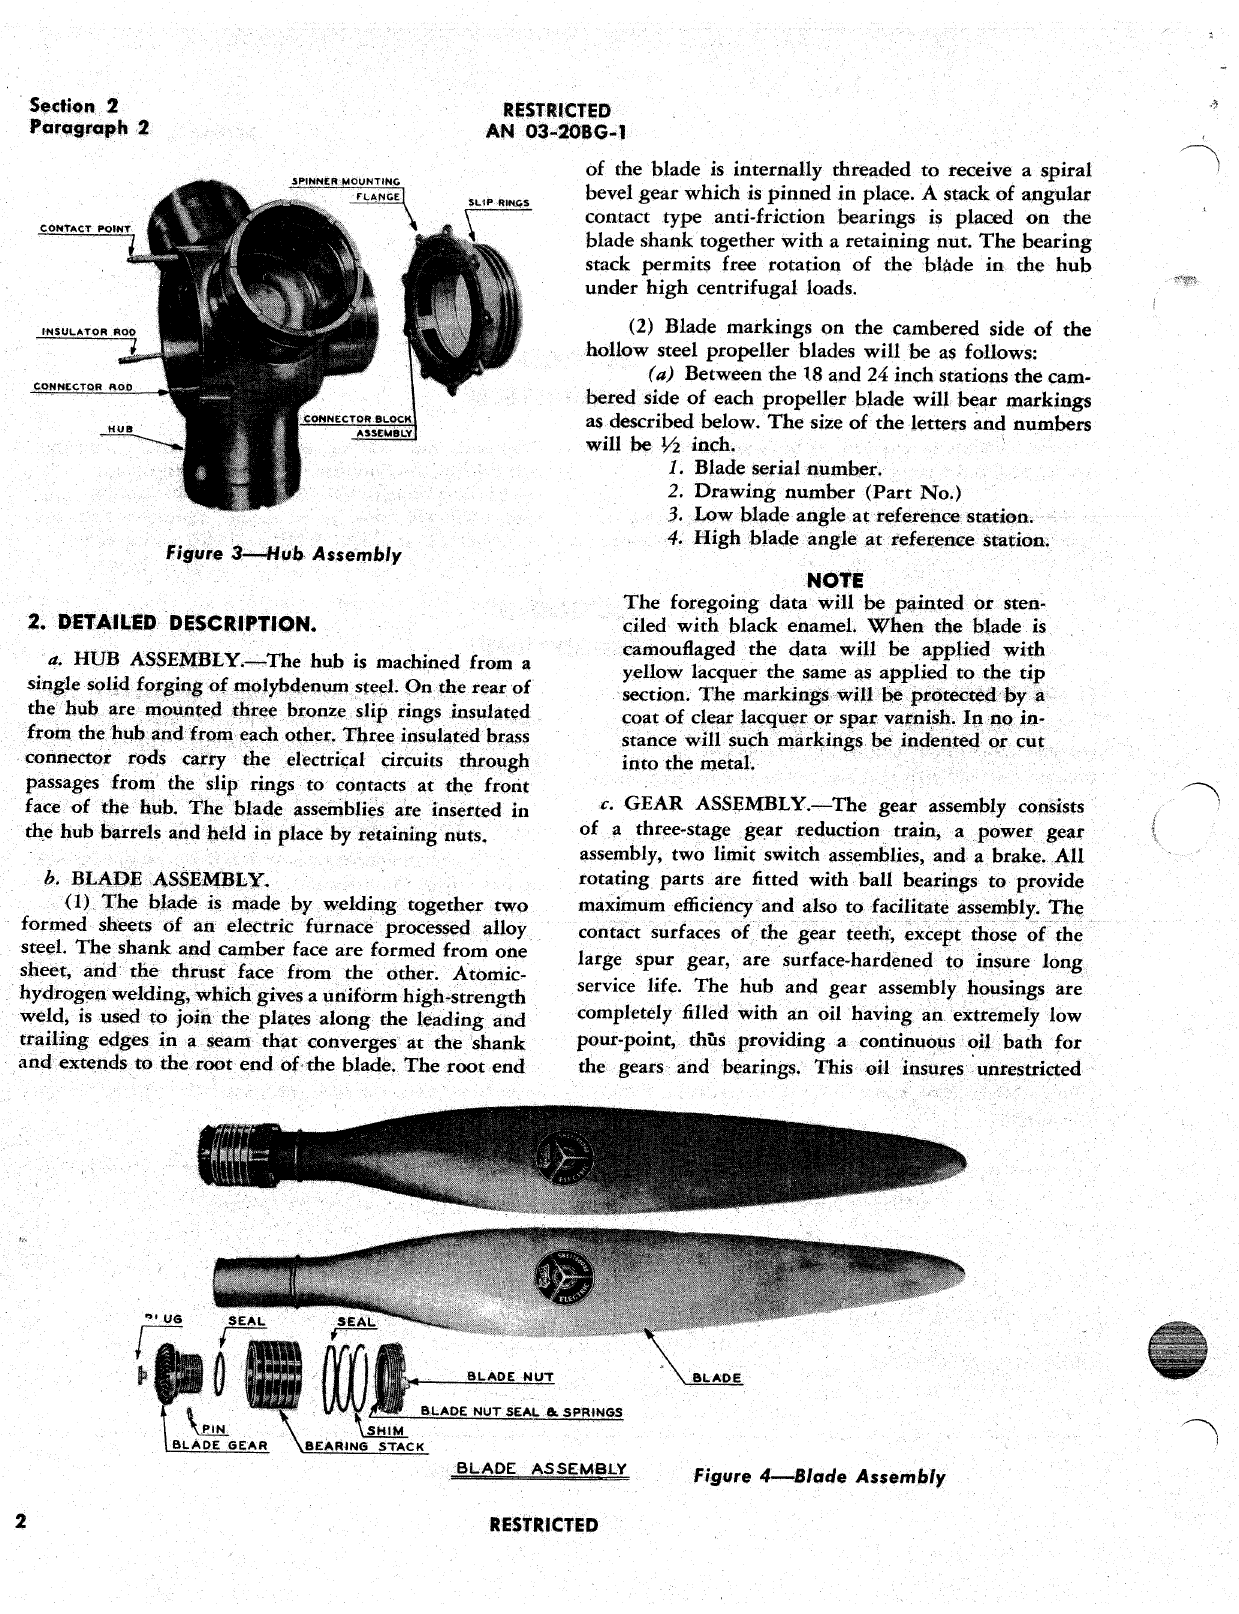 Sample page 6 from AirCorps Library document: Handbook of Instructions with Parts Catalog for Hollow Shaft (Three Blade) Propeller Model C6315SH